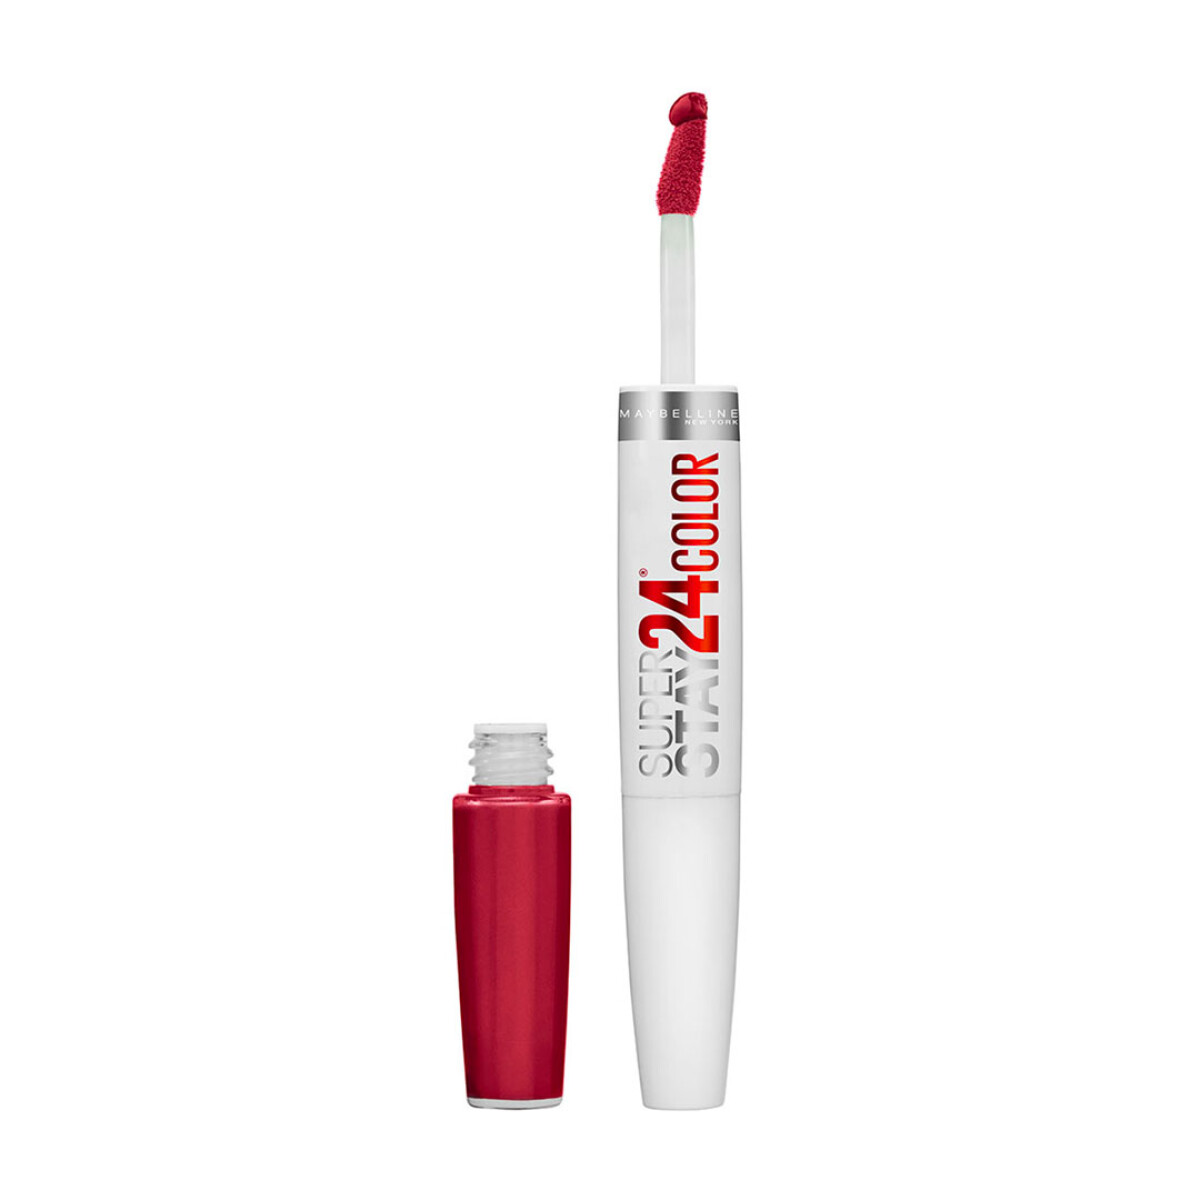 Labial Liquido Maybelline Superstay 24 hrs - Keep Up Flame nº025 